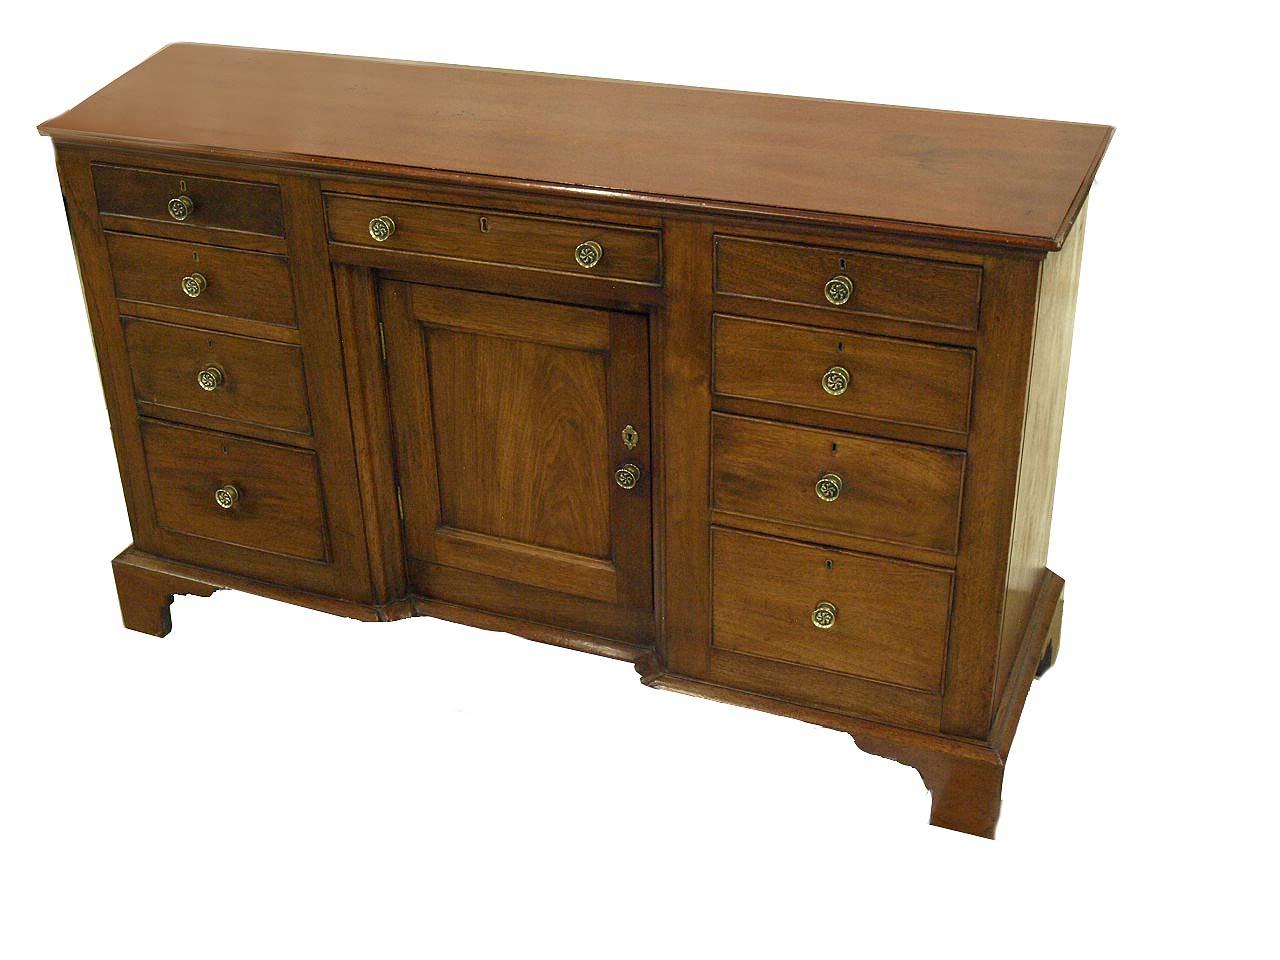 Georgian Mahogany Sideboard In Good Condition For Sale In Wilson, NC